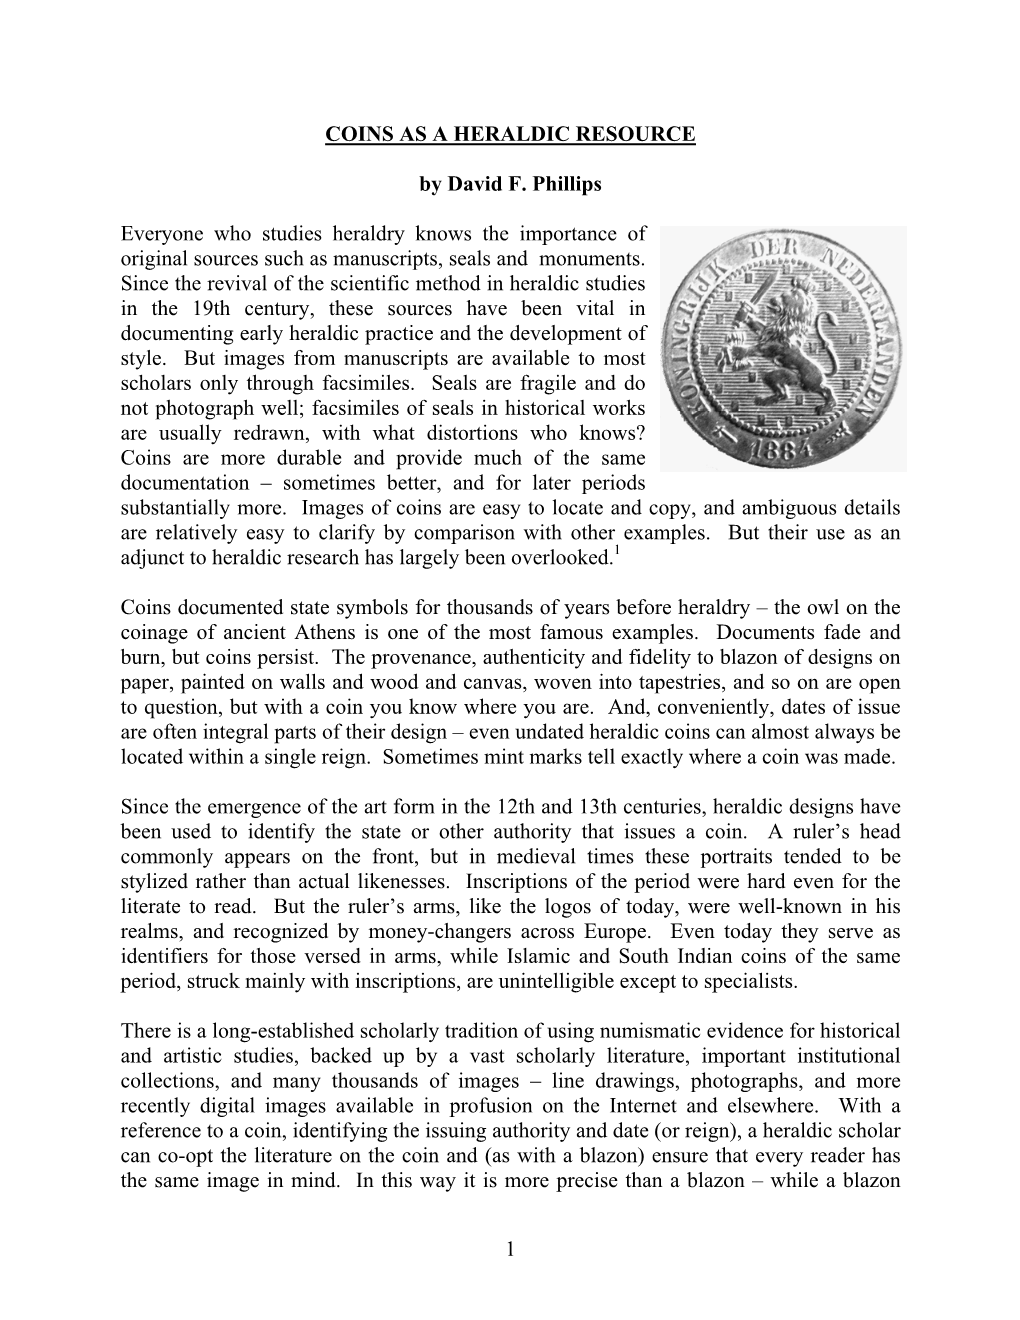 Coins As a Heraldic Resource